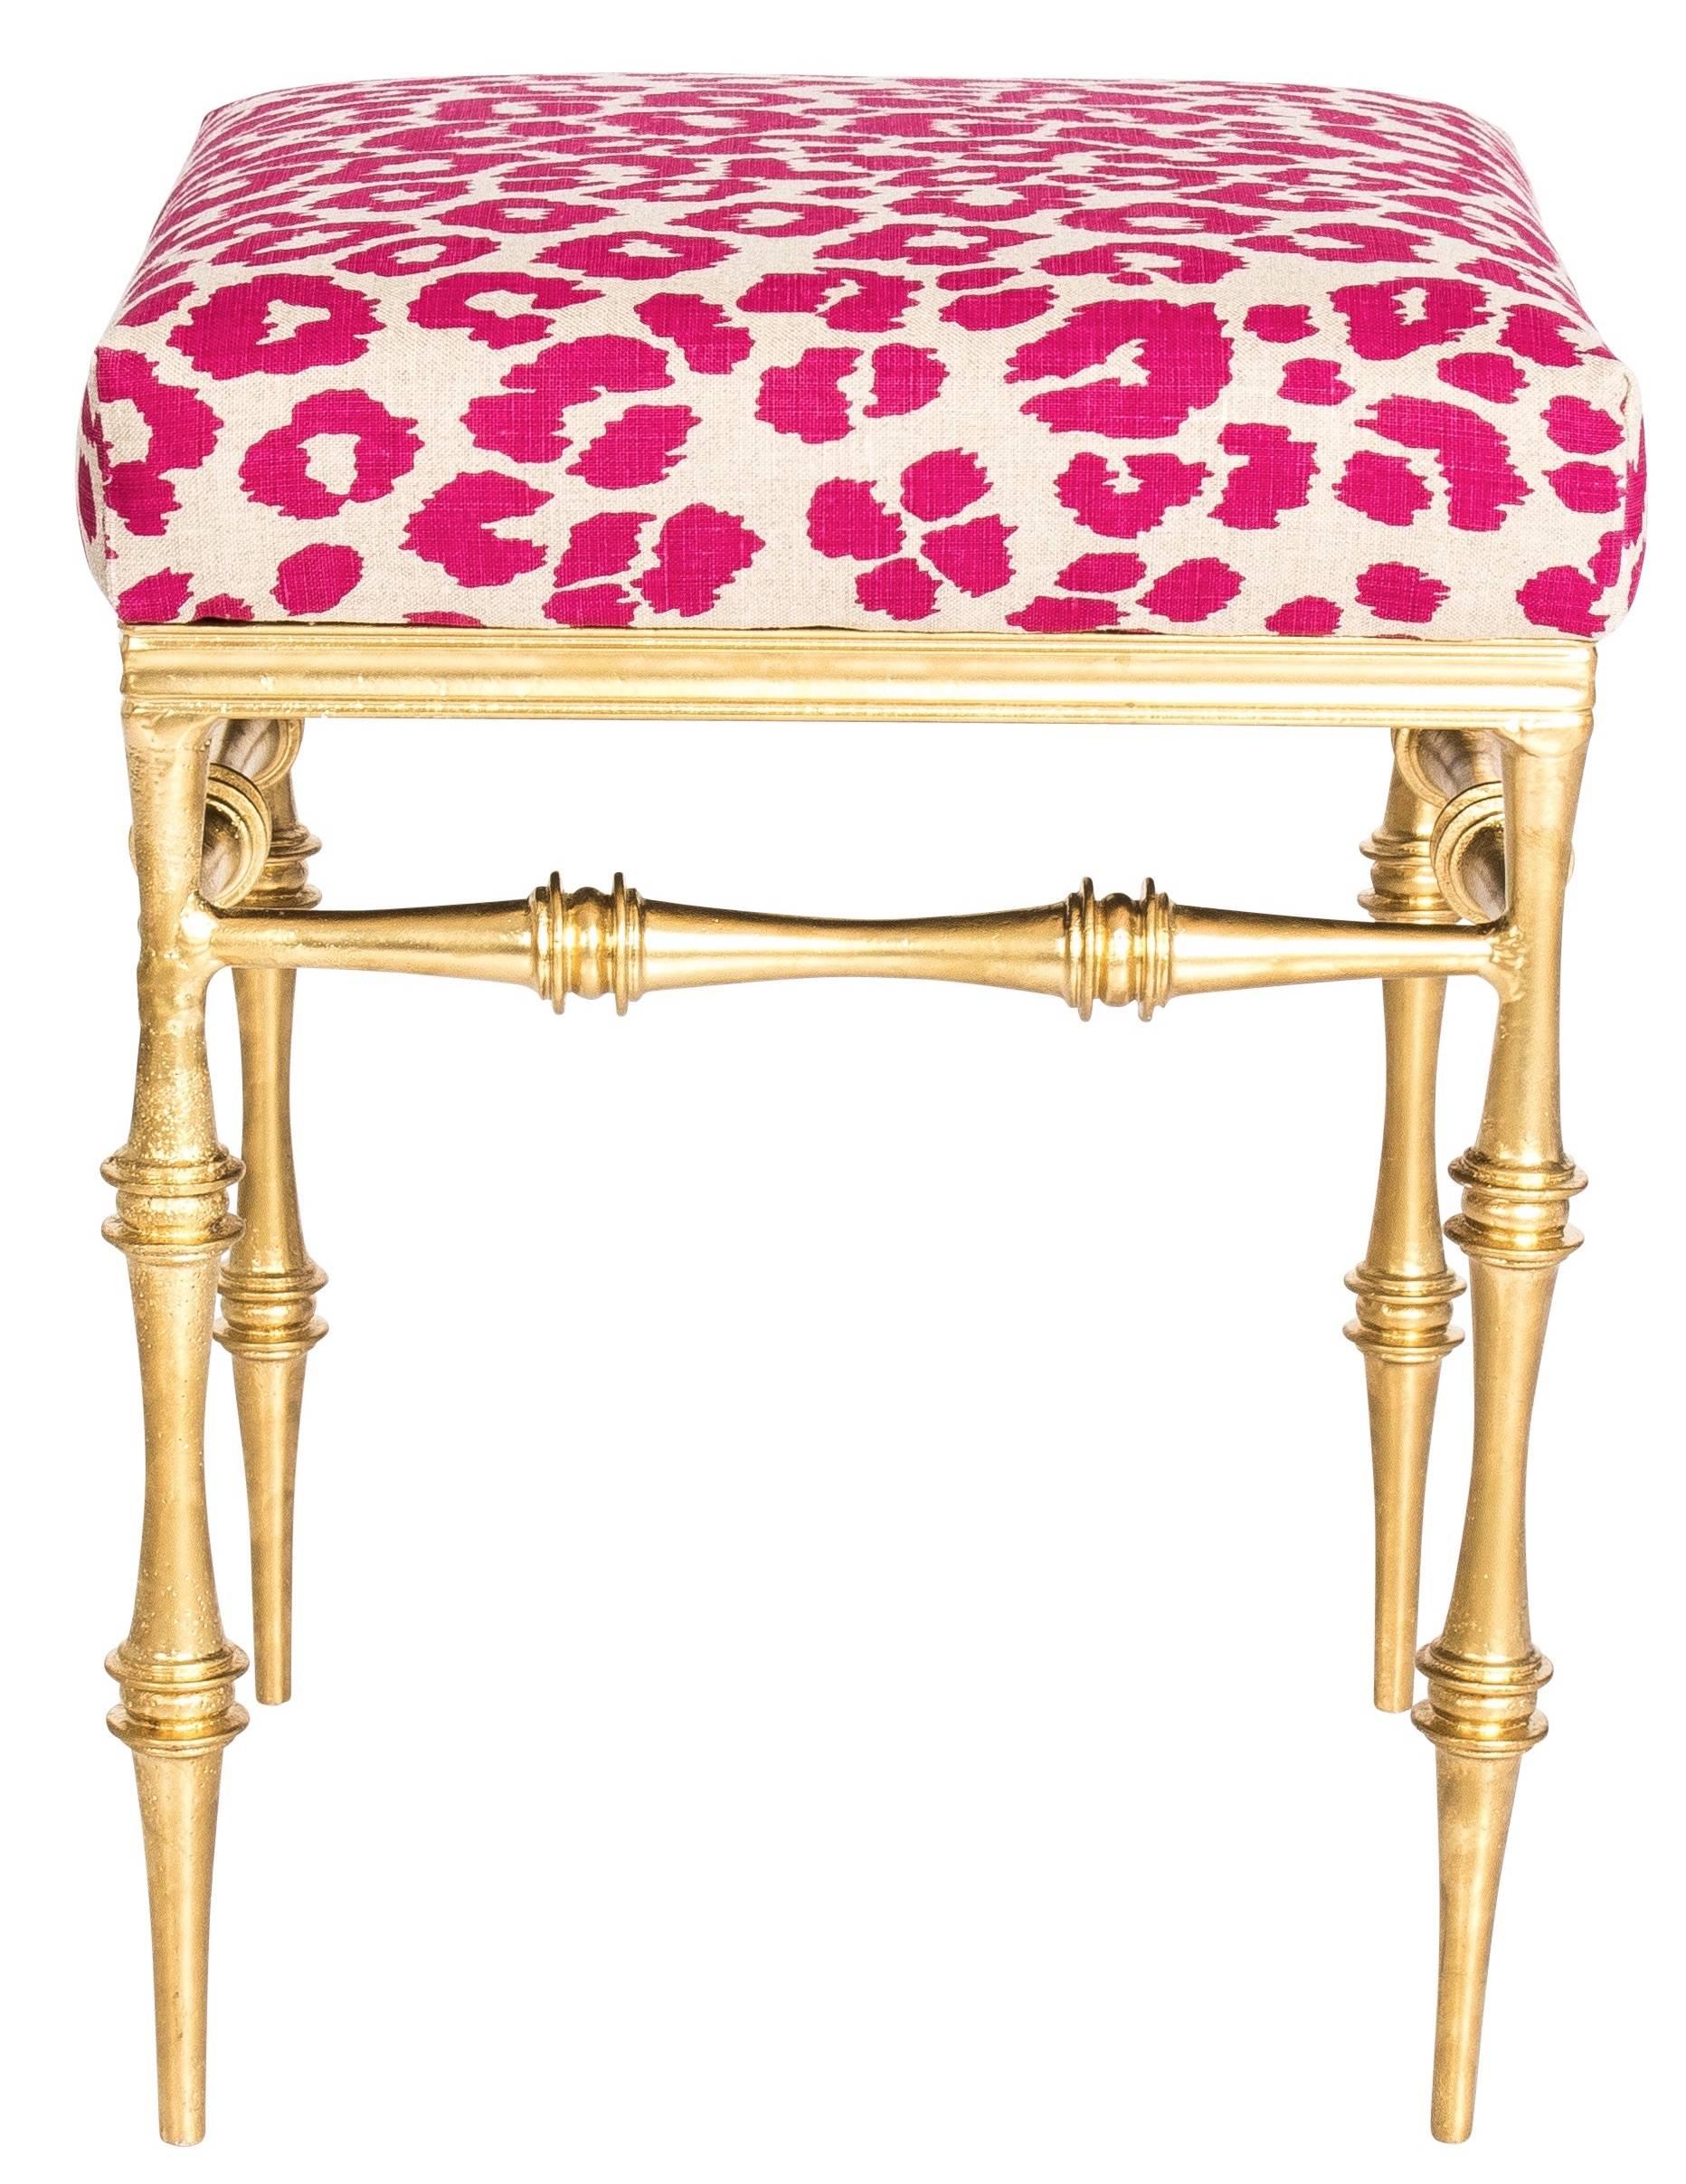 Pair of gold gilt metal benches. Newly upholstered in Schumacher 'Iconic Leopard' linen fabric in fuschia pink/ natural colorway.
 